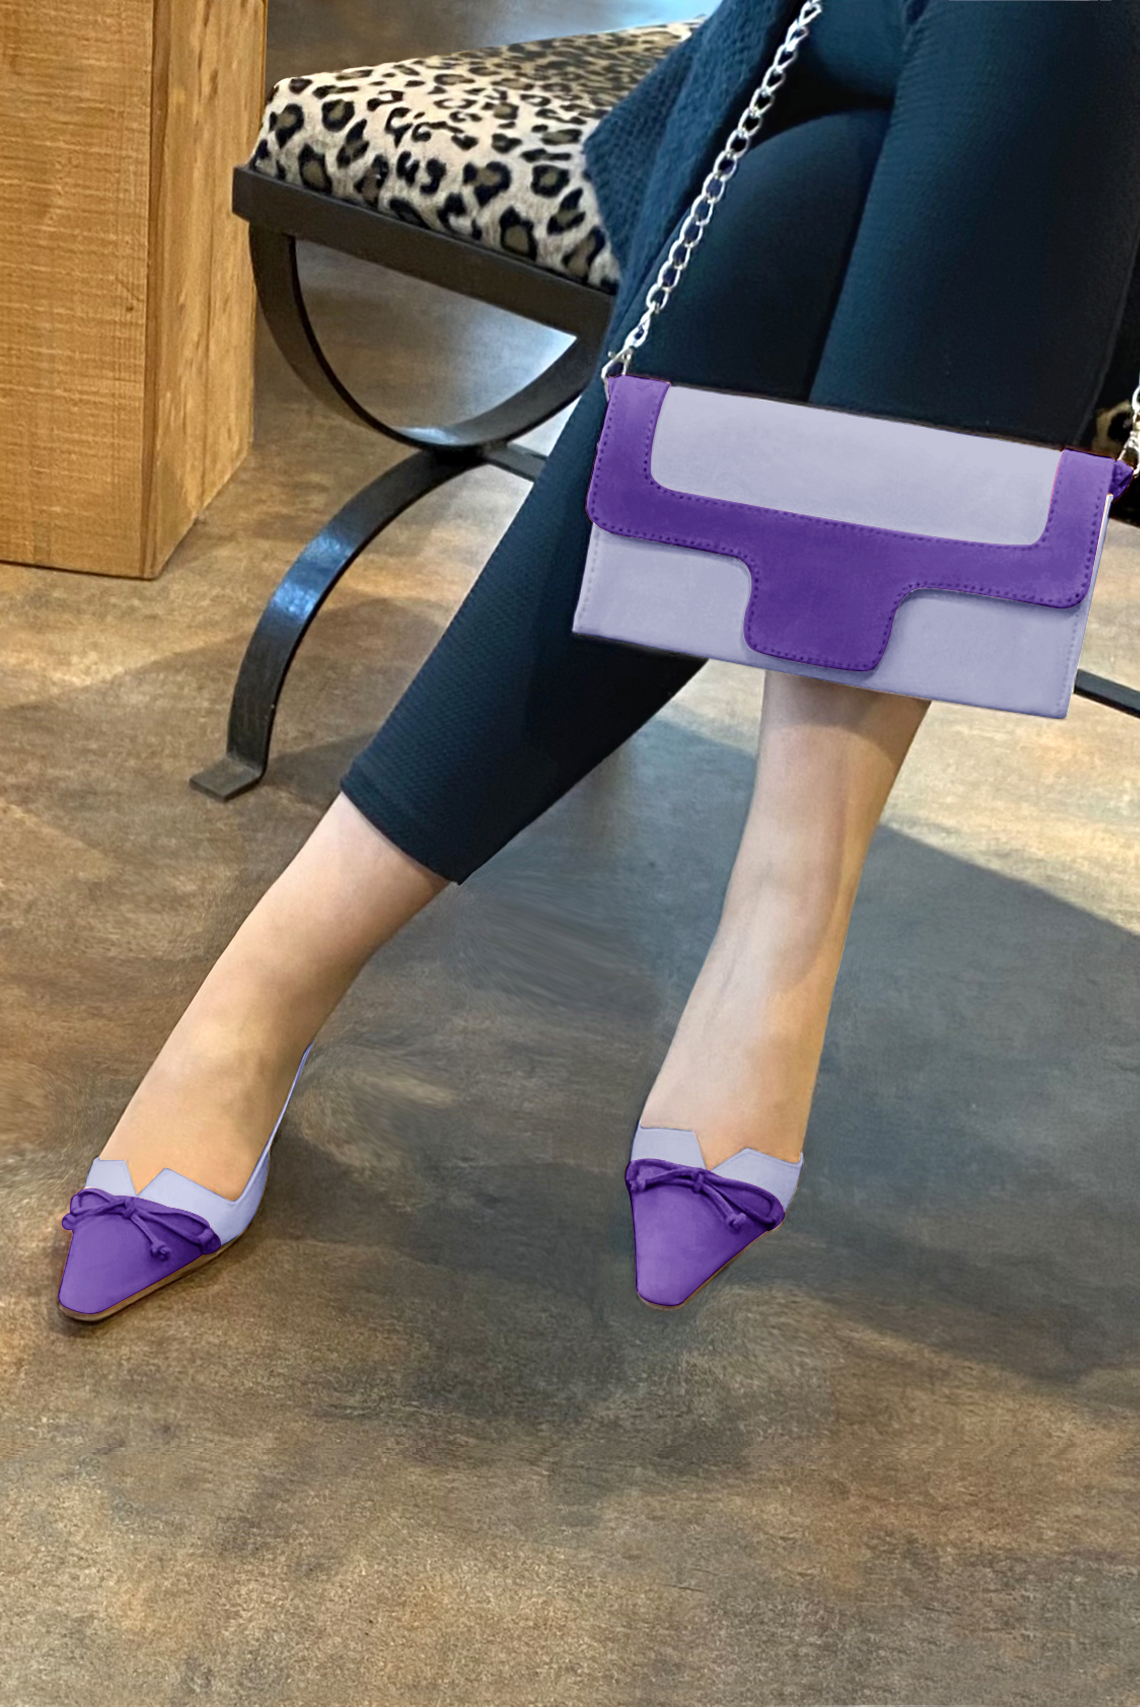 Violet purple women's open back shoes, with a knot. Tapered toe. Medium spool heels. Worn view - Florence KOOIJMAN